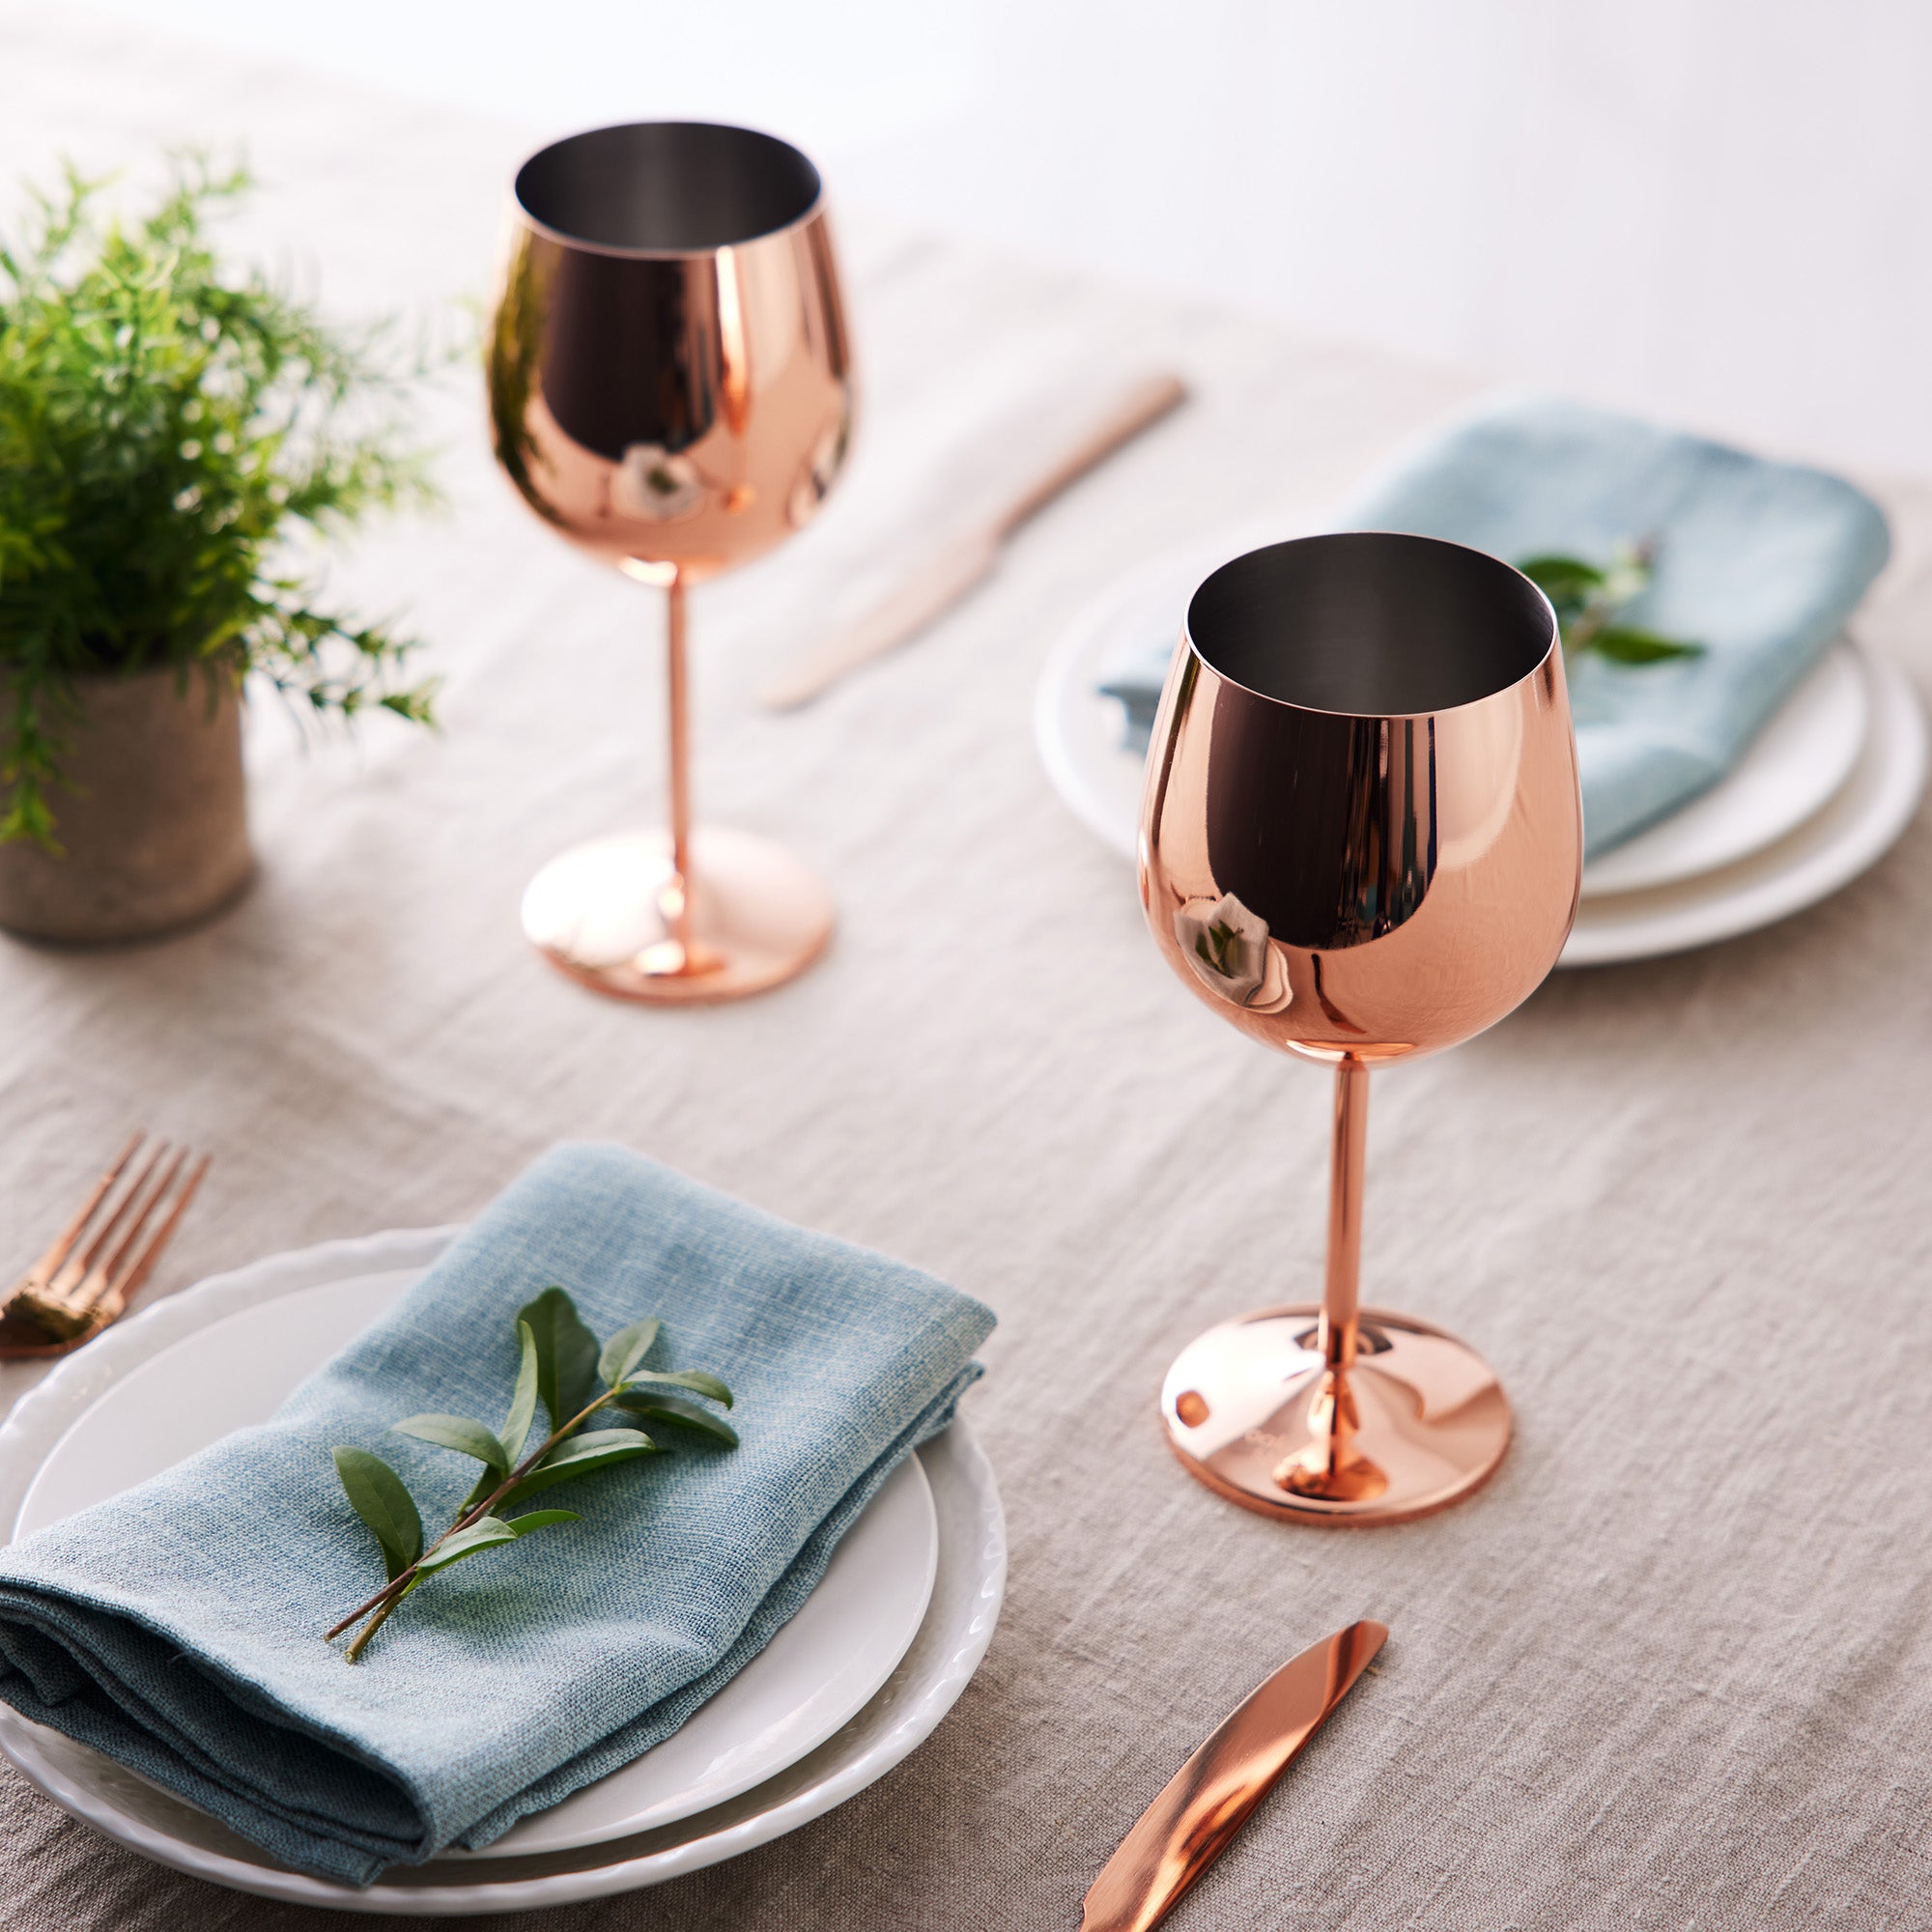 4 Rose Gold Stainless Steel Wine Glasses